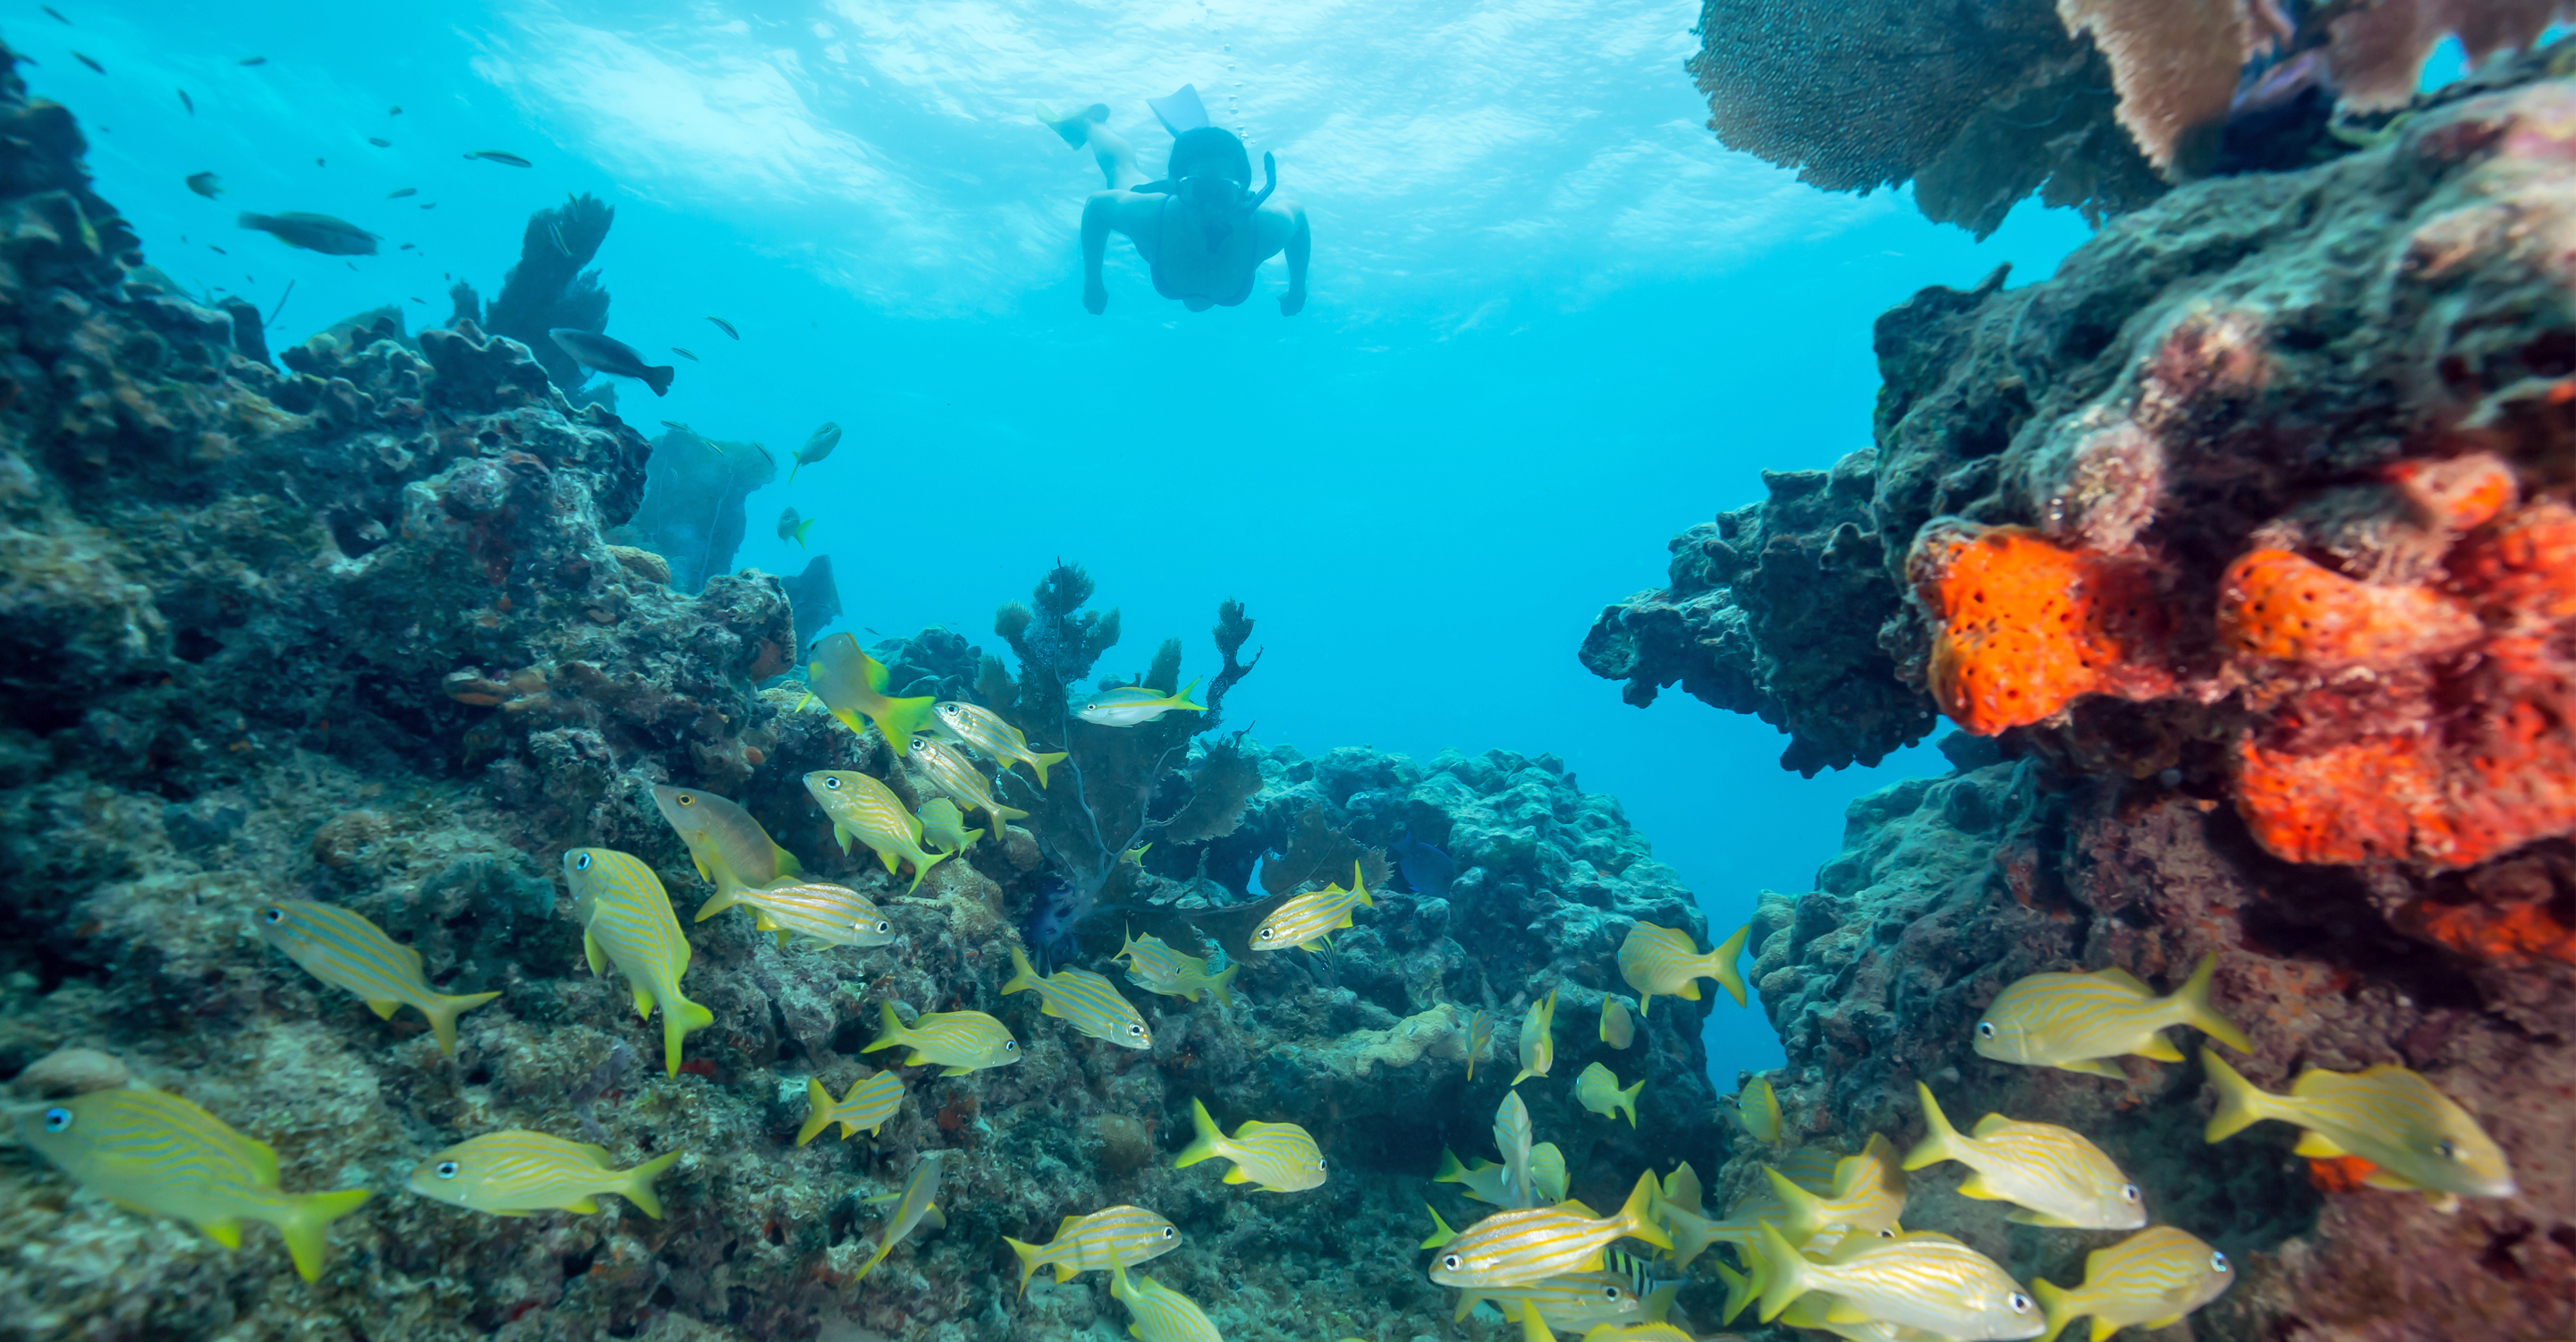 Snorkelers swimming underwater with yellow fish in Key West, Florida, United States